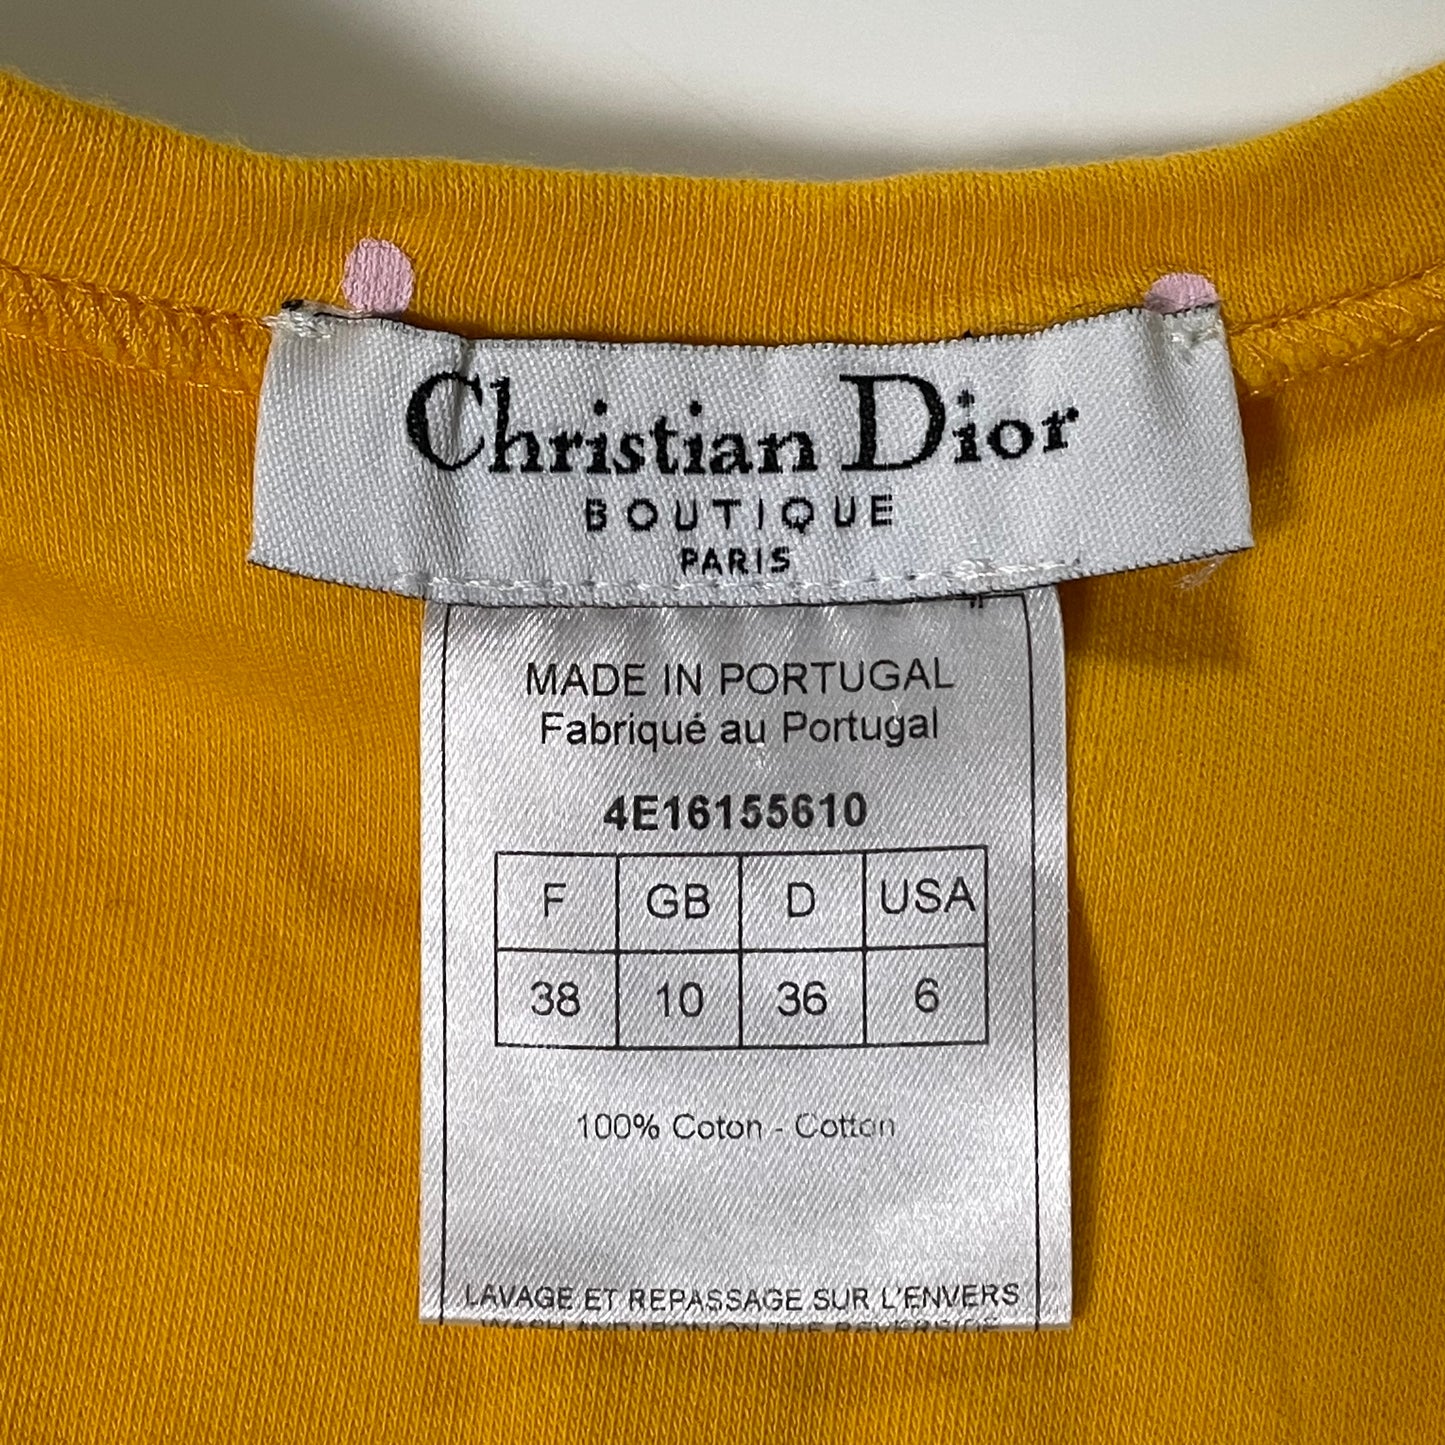 CHRISTIAN DIOR Spring Summer 2004 Surf Chick Laced Up Tank Top